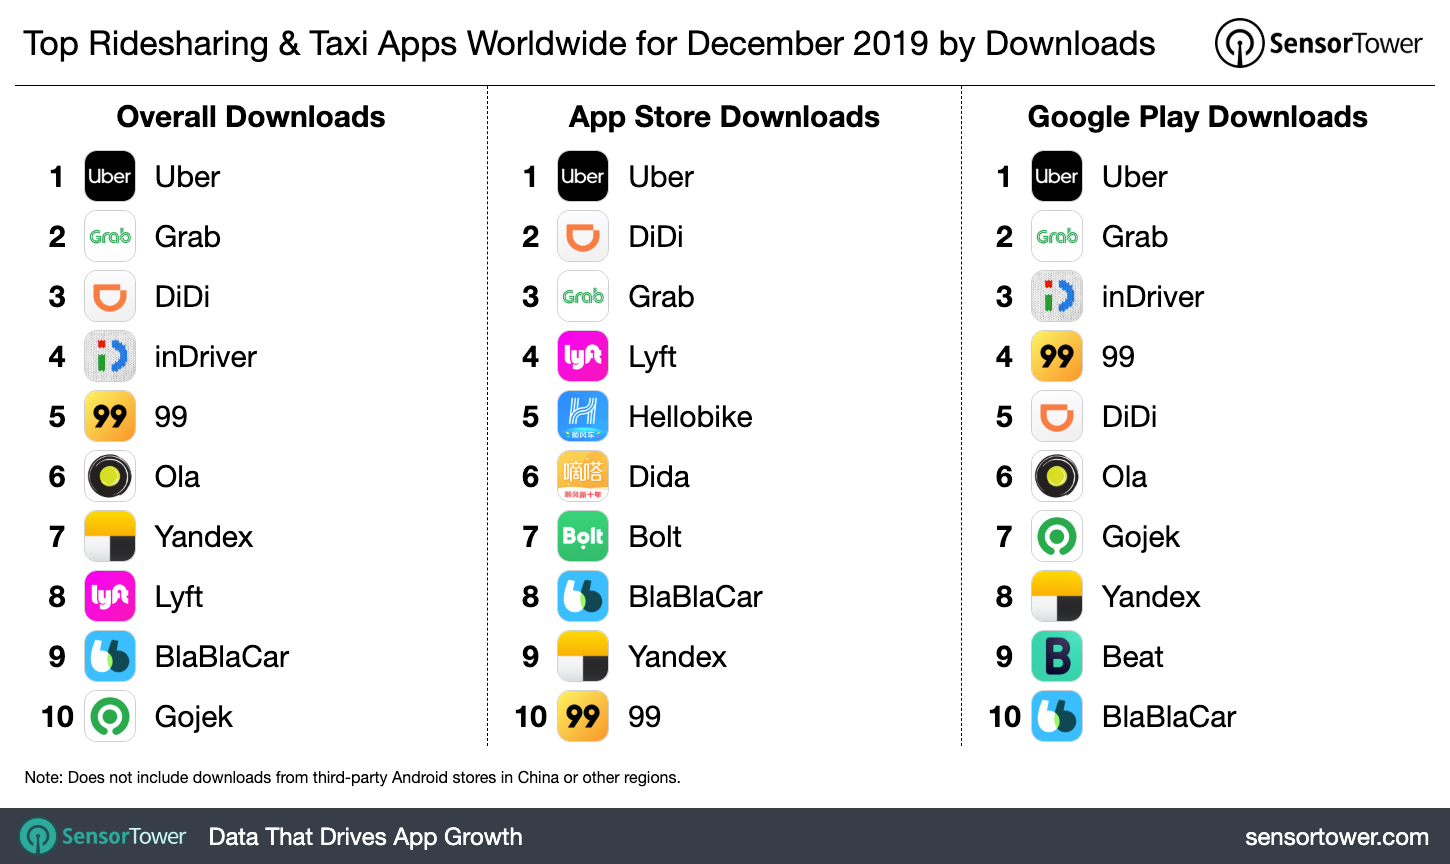 Top Ridesharing & Taxi Apps Worldwide for December 2019 by Downloads